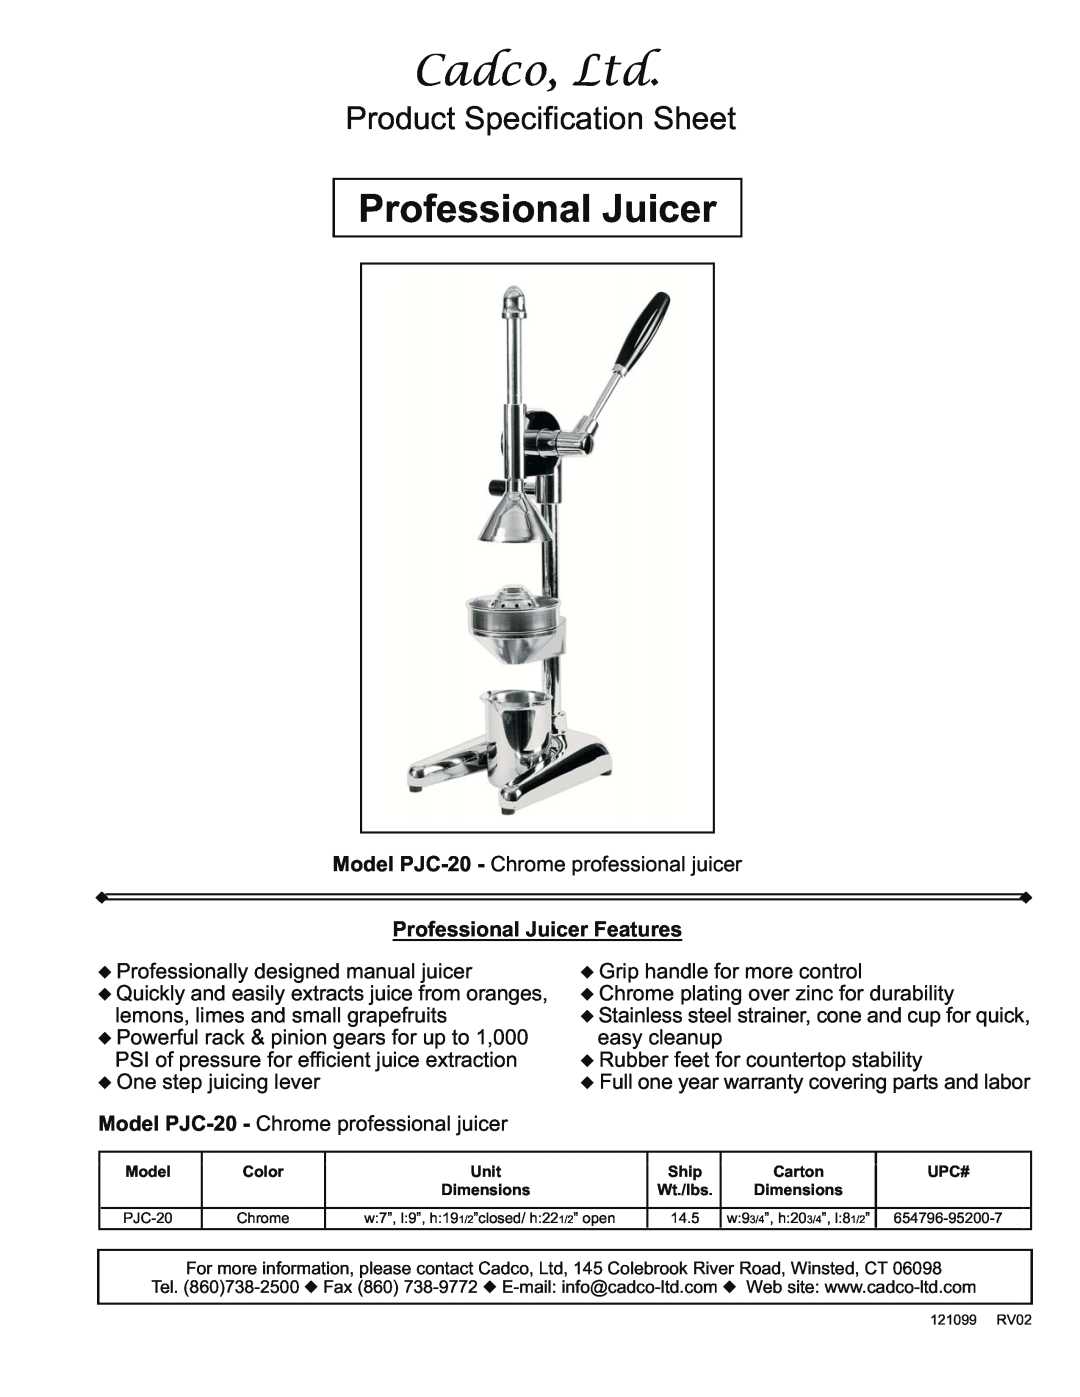 Cadco PJC-20 specifications Product Specification Sheet, Professional Juicer Features 